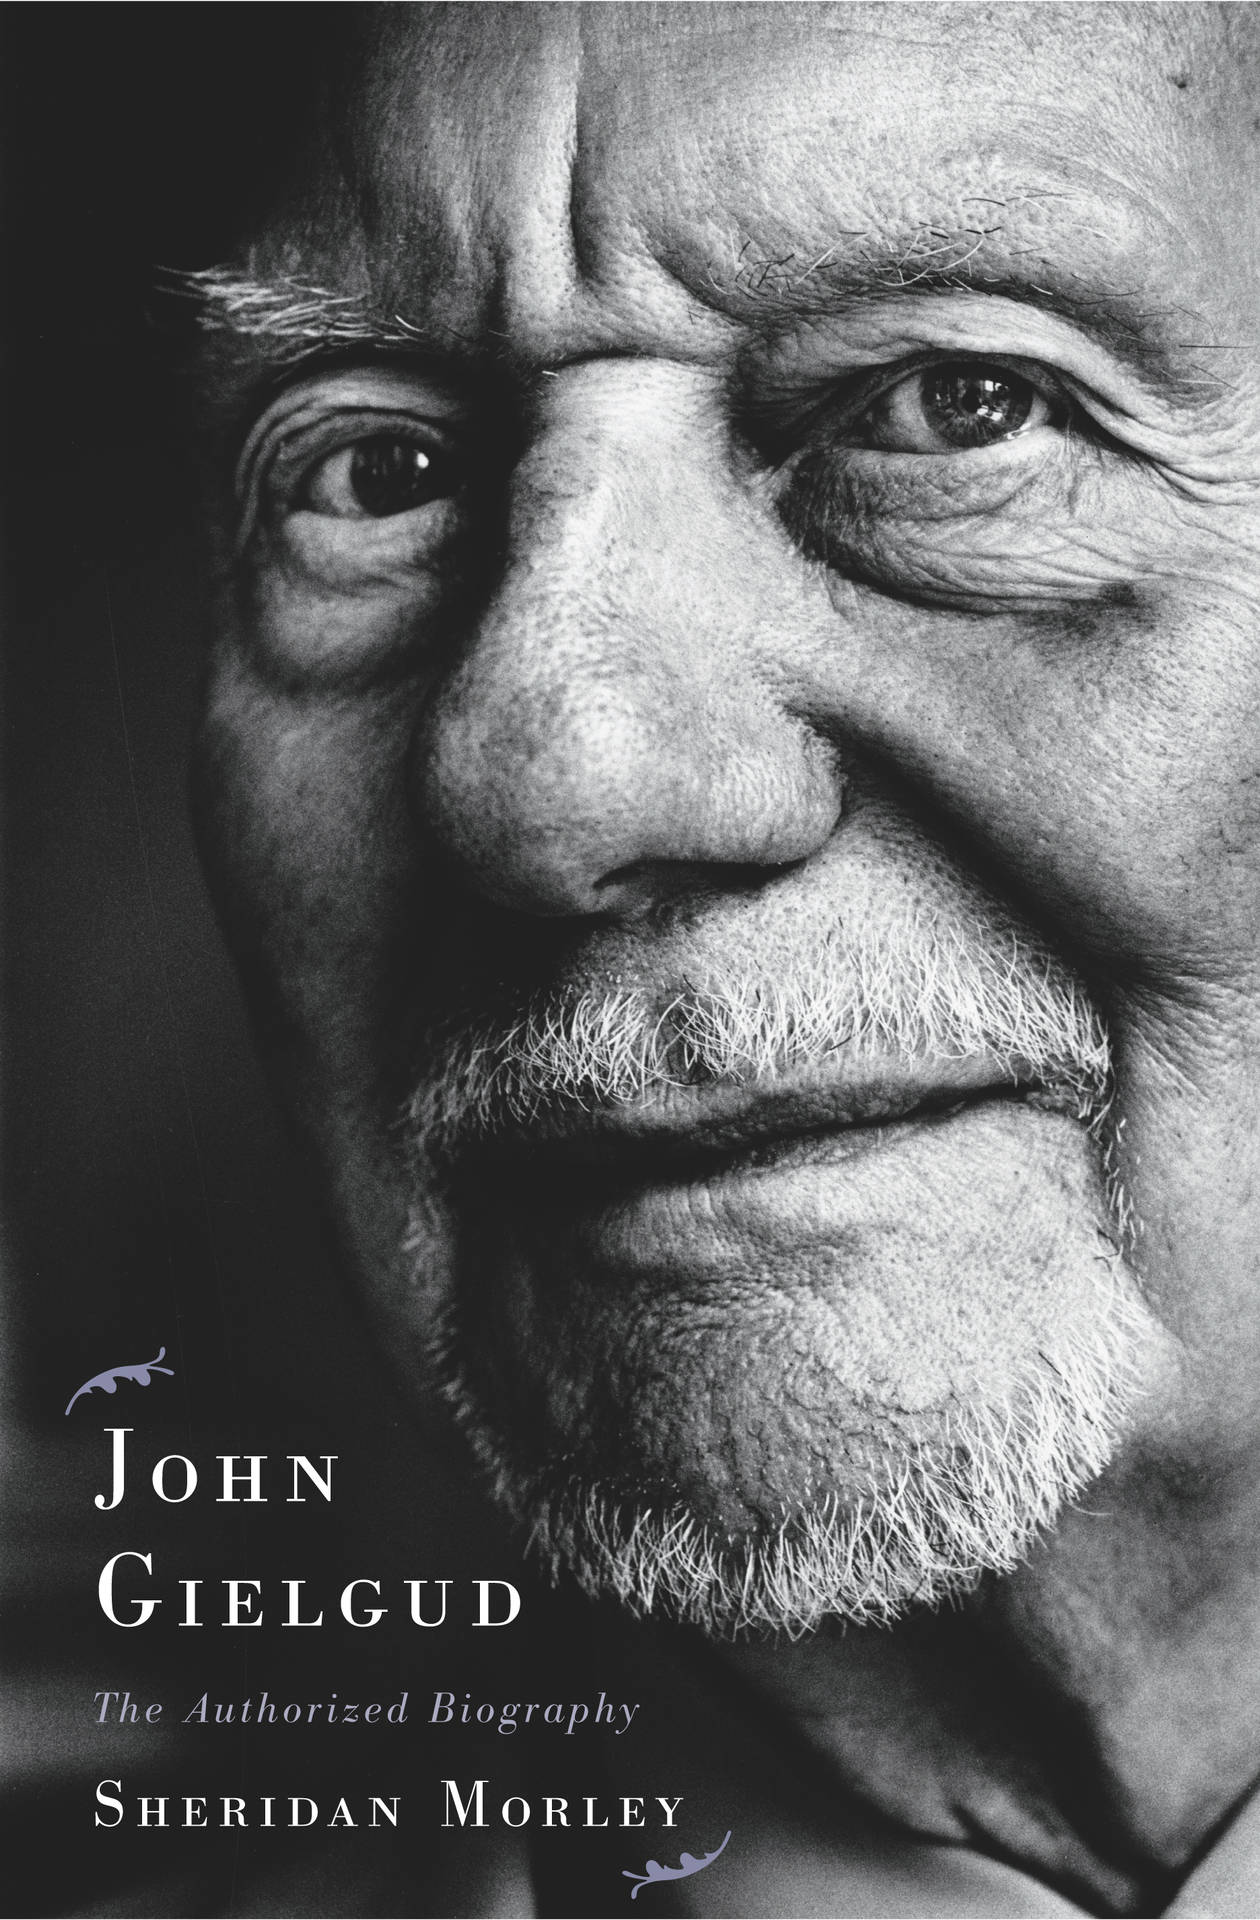 The Authorized Biography Of John Gielgud Cover Wallpaper